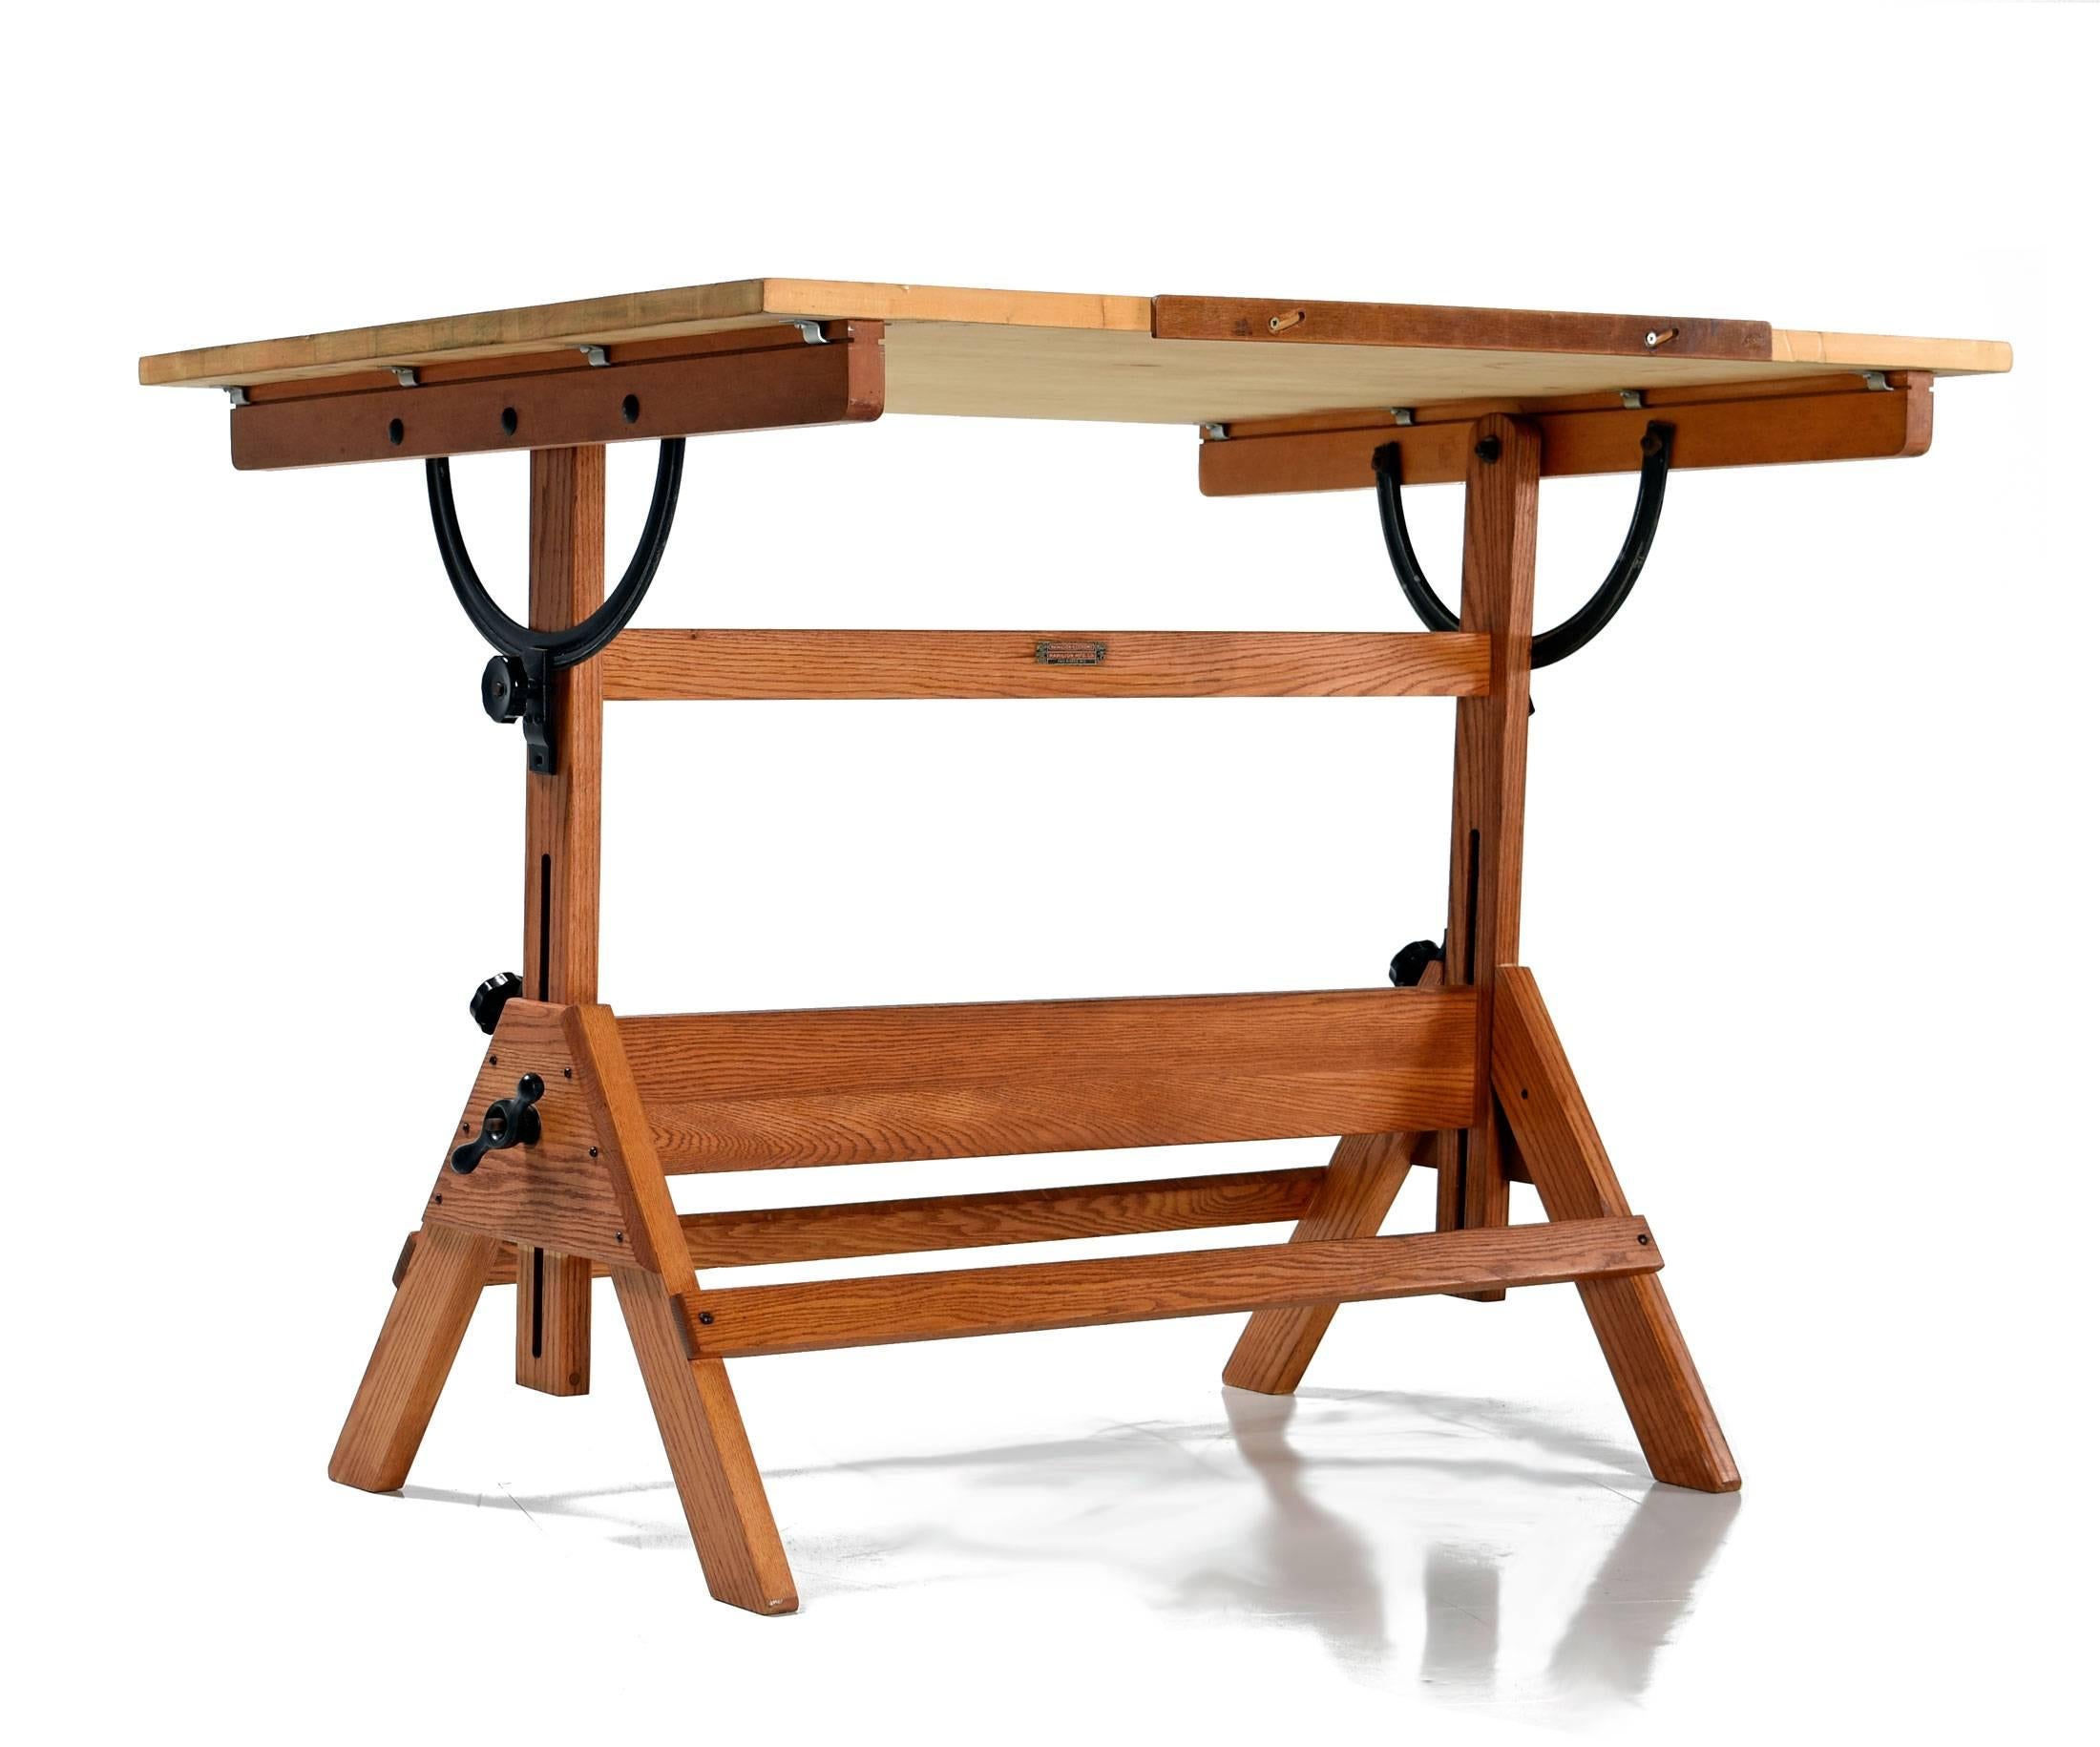 Original drafting table manufactured by Hamilton in the US in the 1940s. This large work table features an oak base, pine tabletop and cast iron hardware. This large tabletop articulates to be either completely horizontal or pitched at varying